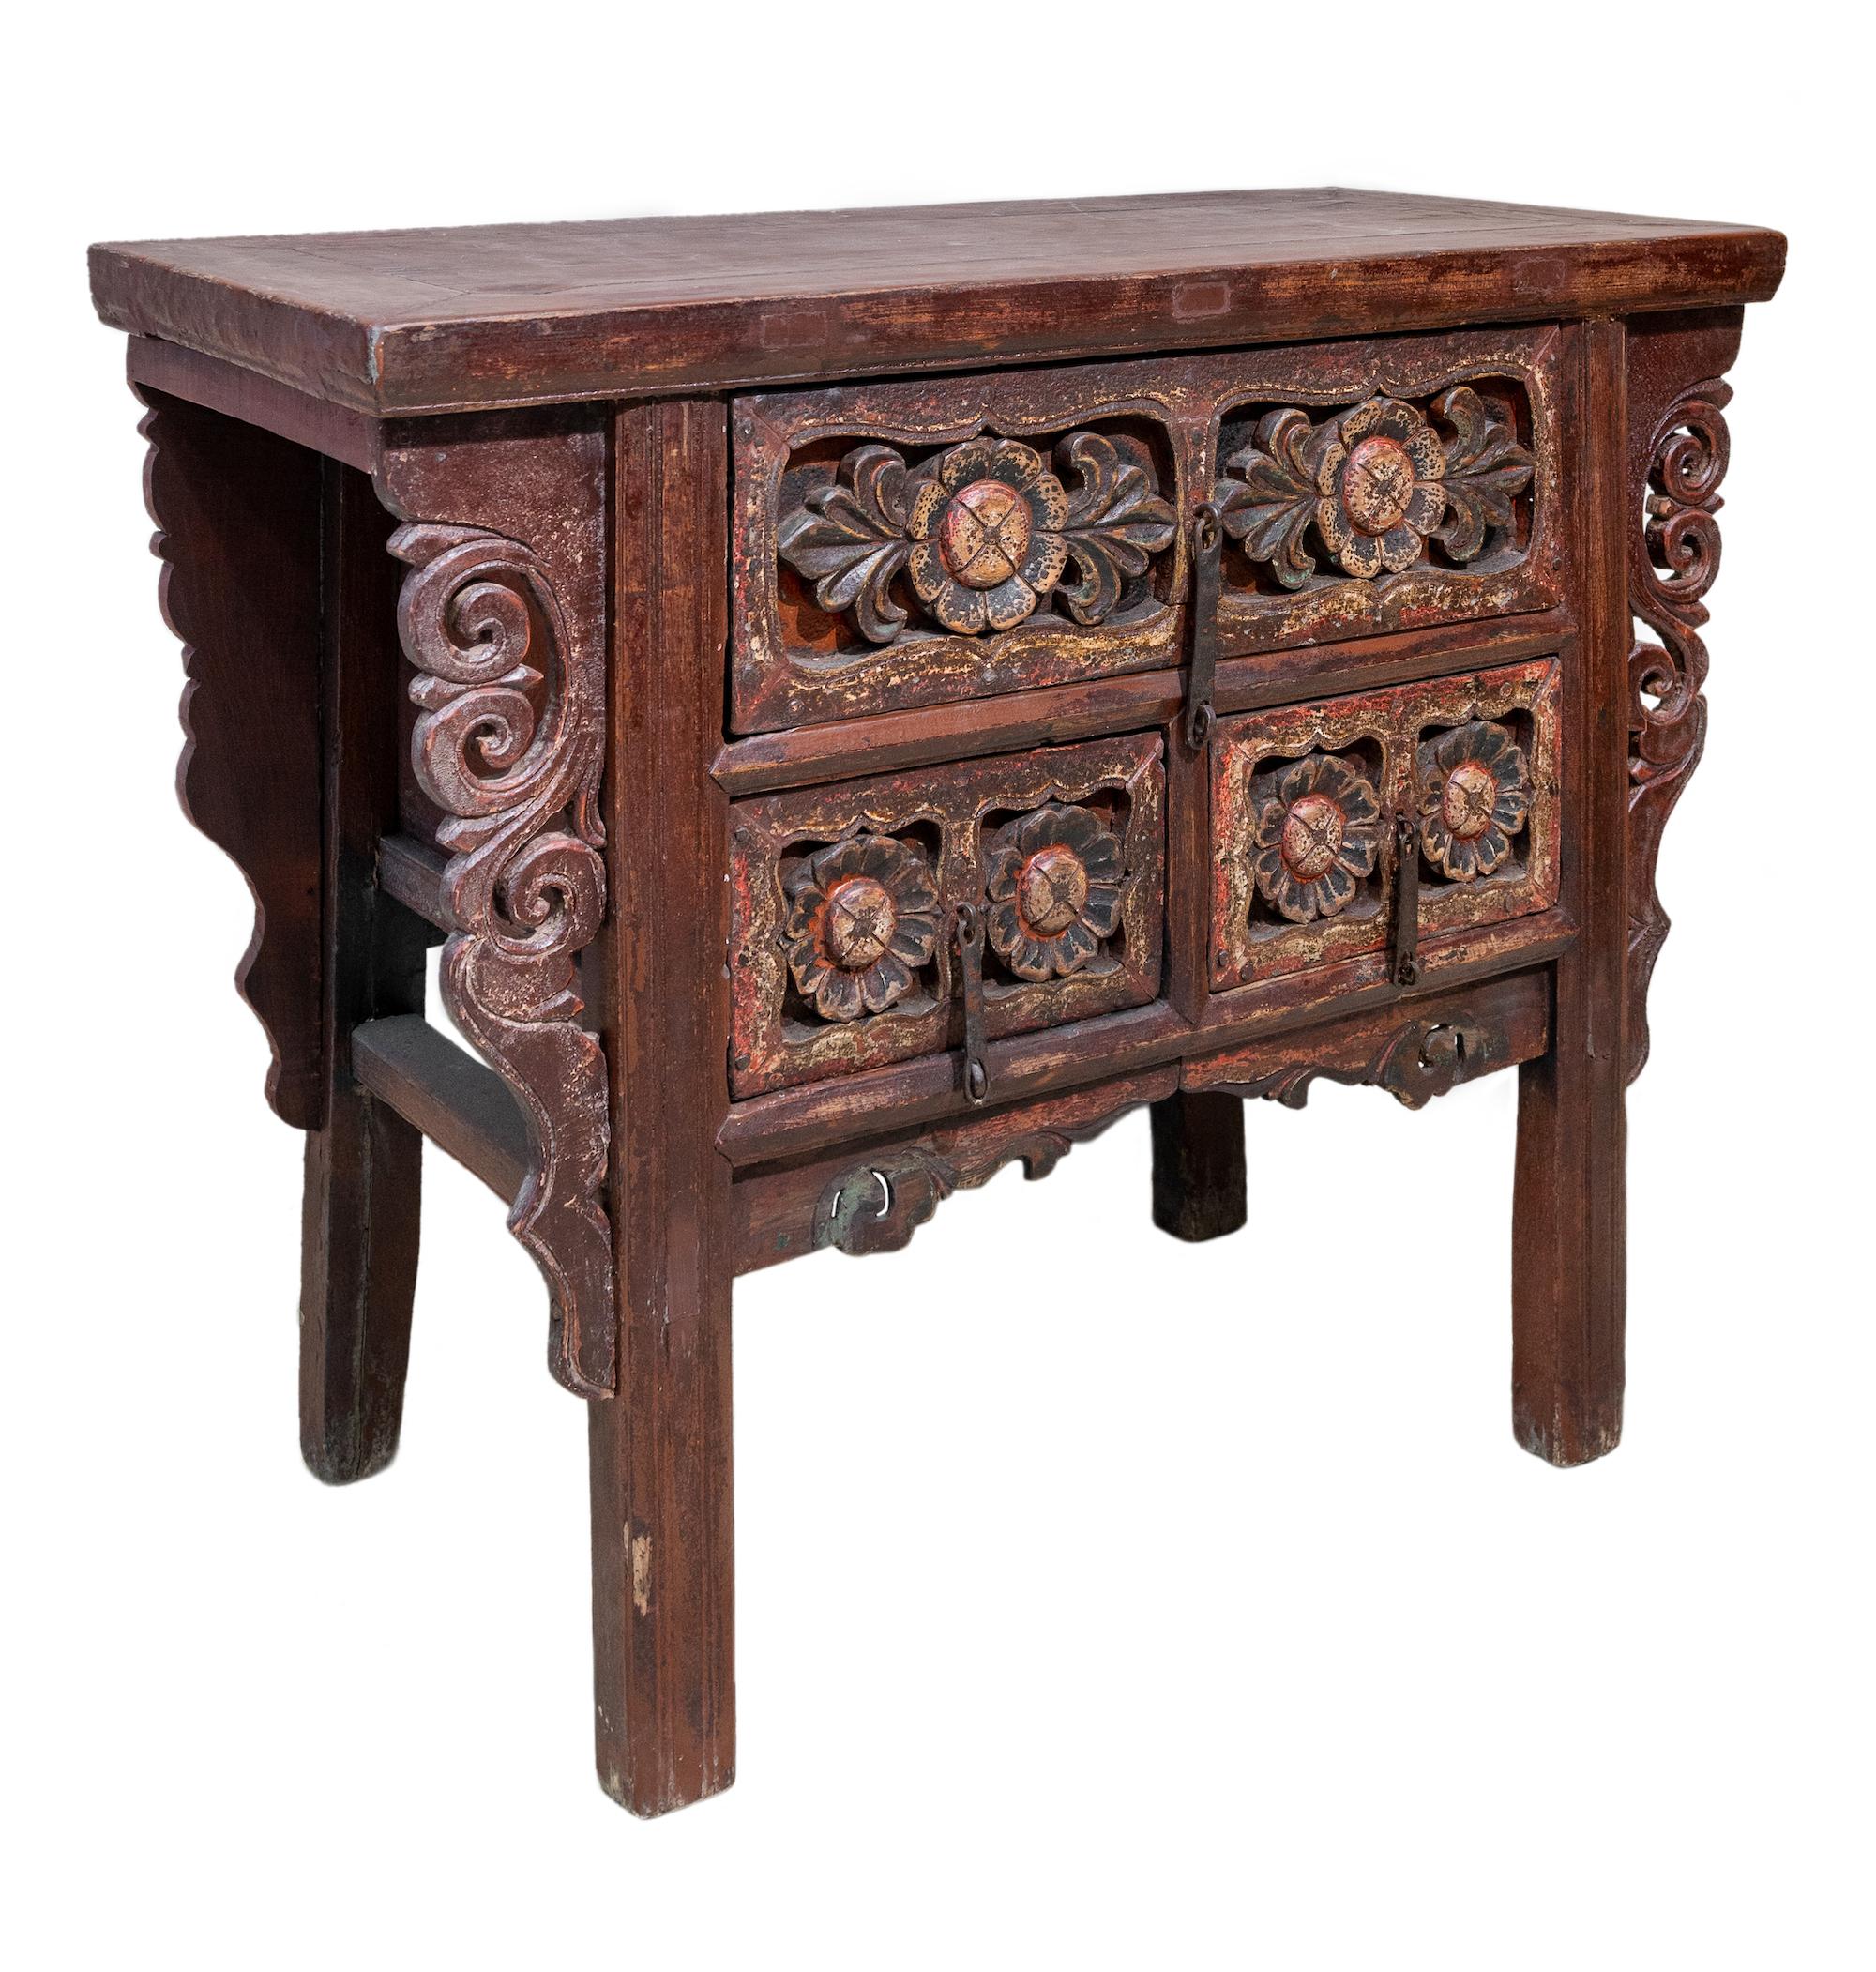 A mid-19th century coffer table from Shanxi province, China. Approximate 150-200 years old. The carvings on this table has a floral theme, with very deep chunky carvings that is a distinct style of pieces from that region. It has a nice original